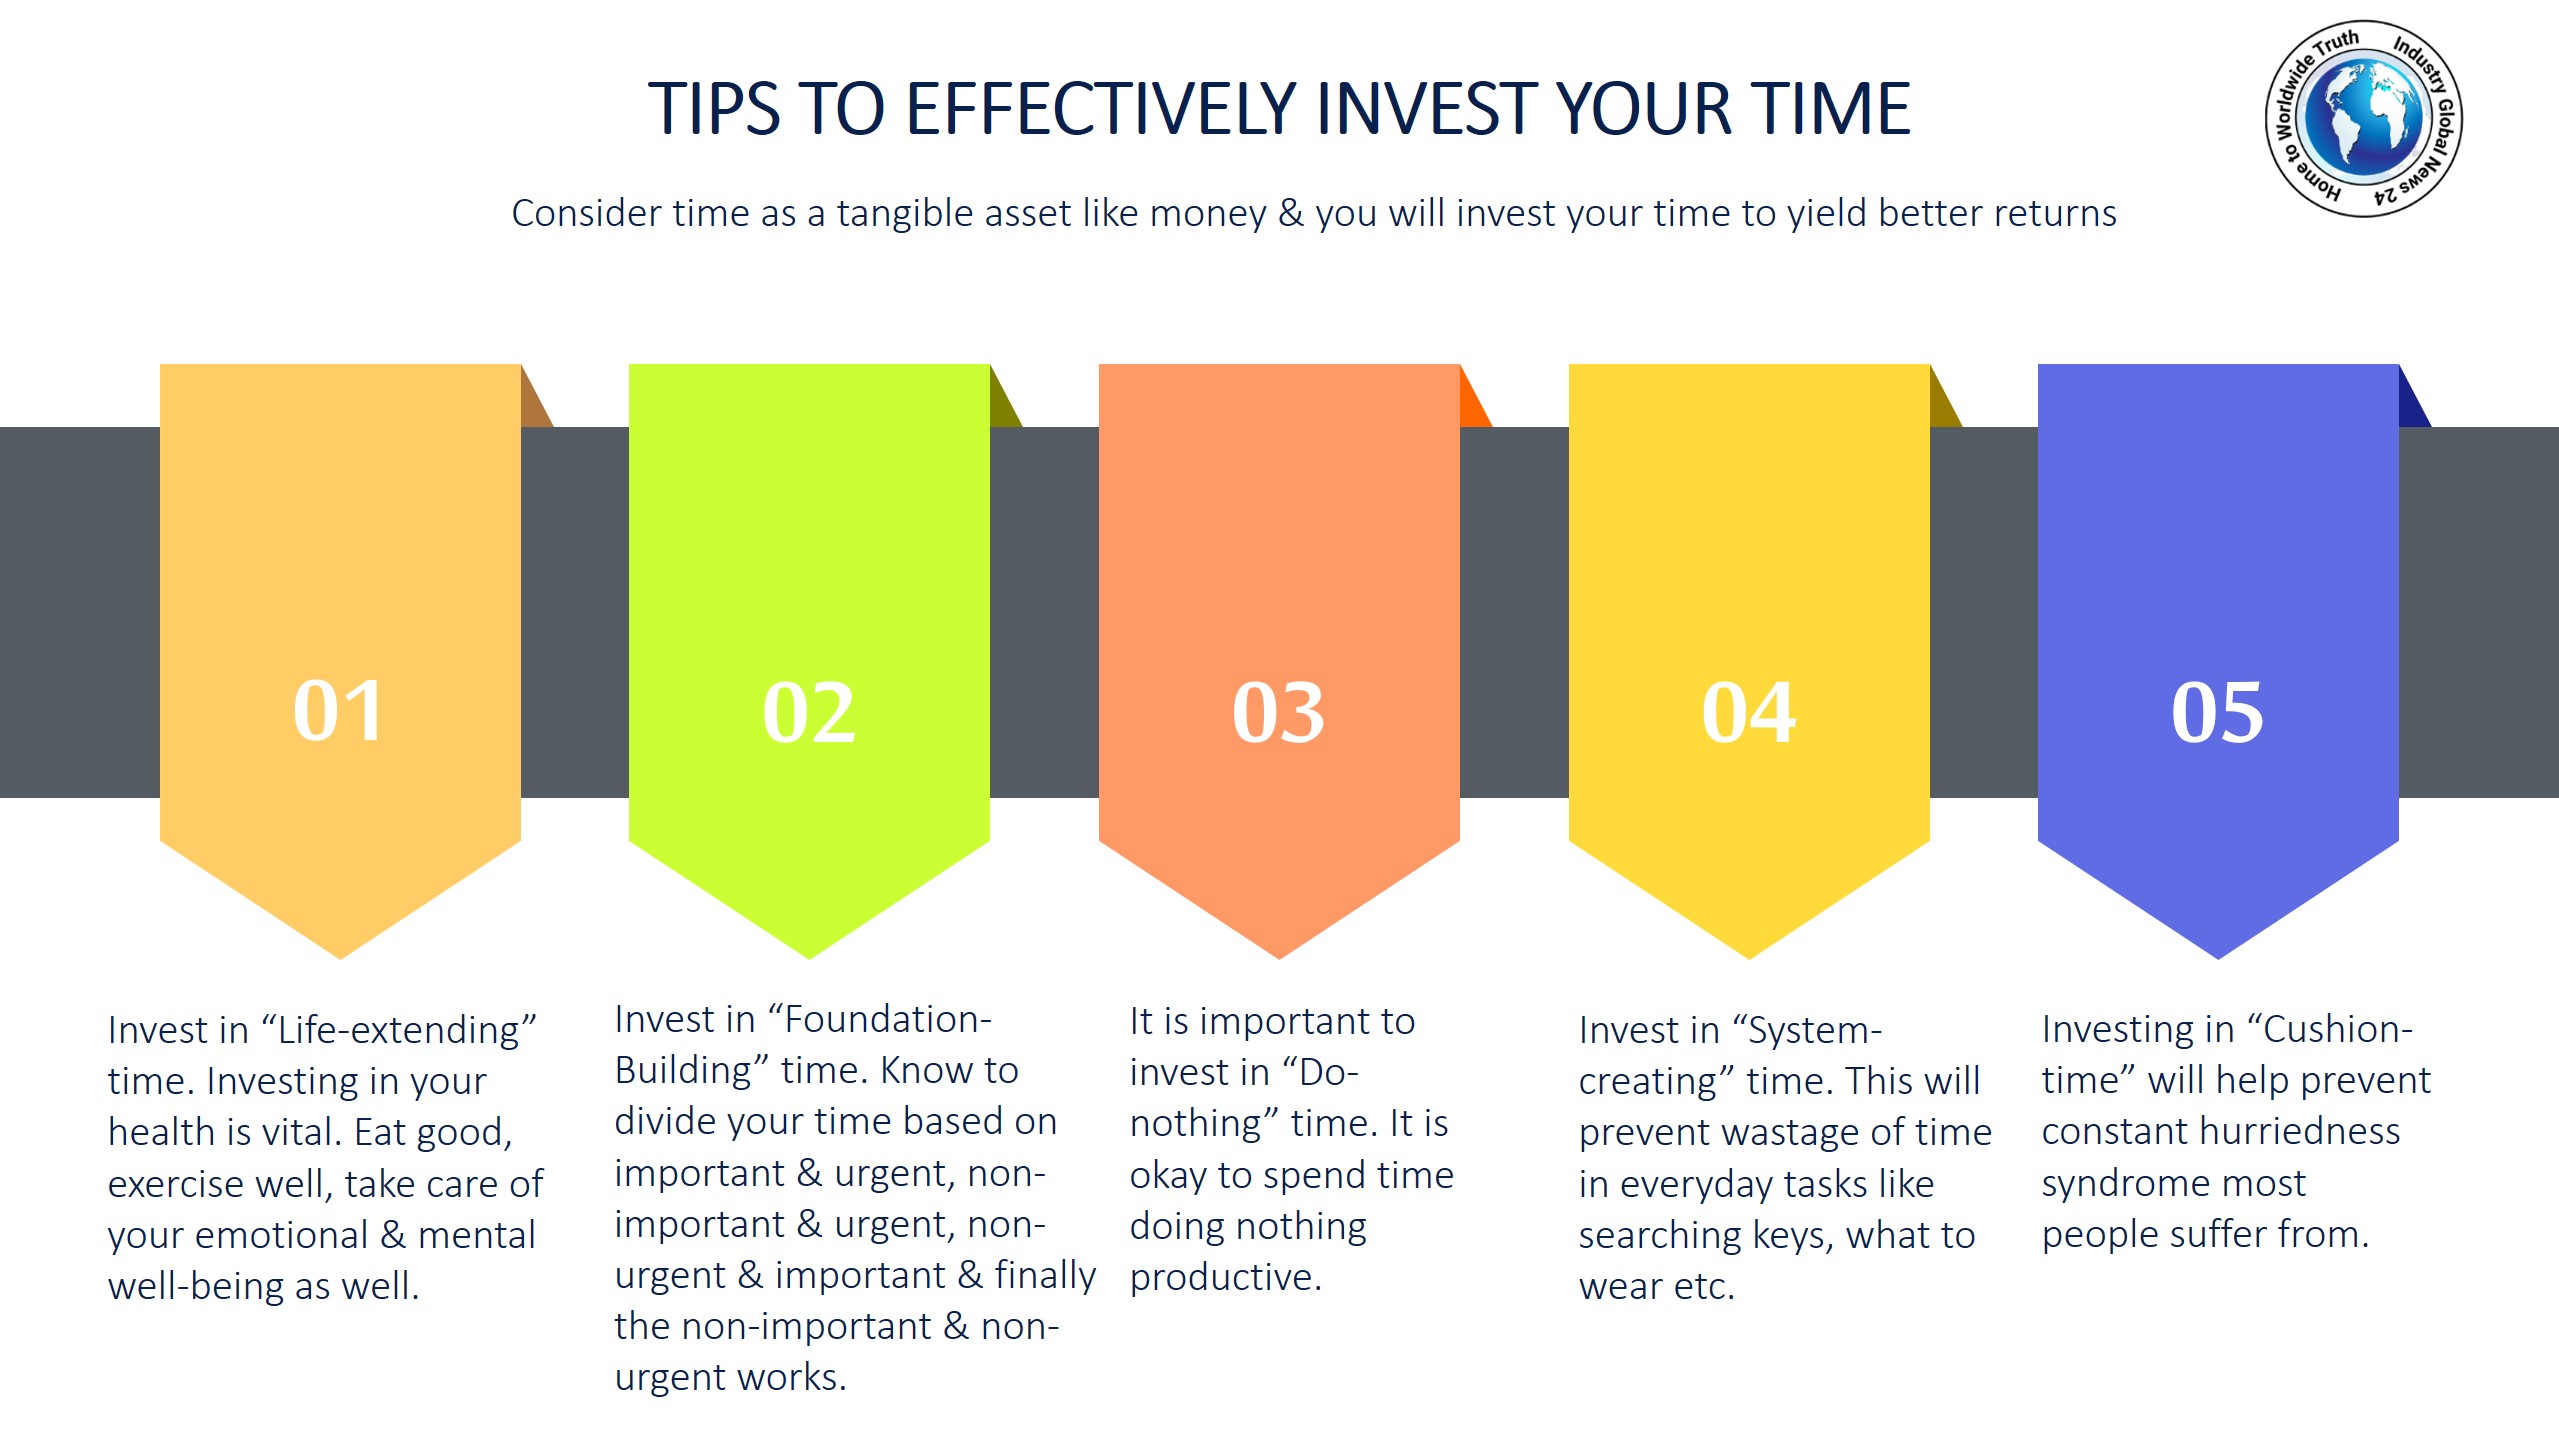 Tips to effectively invest your time